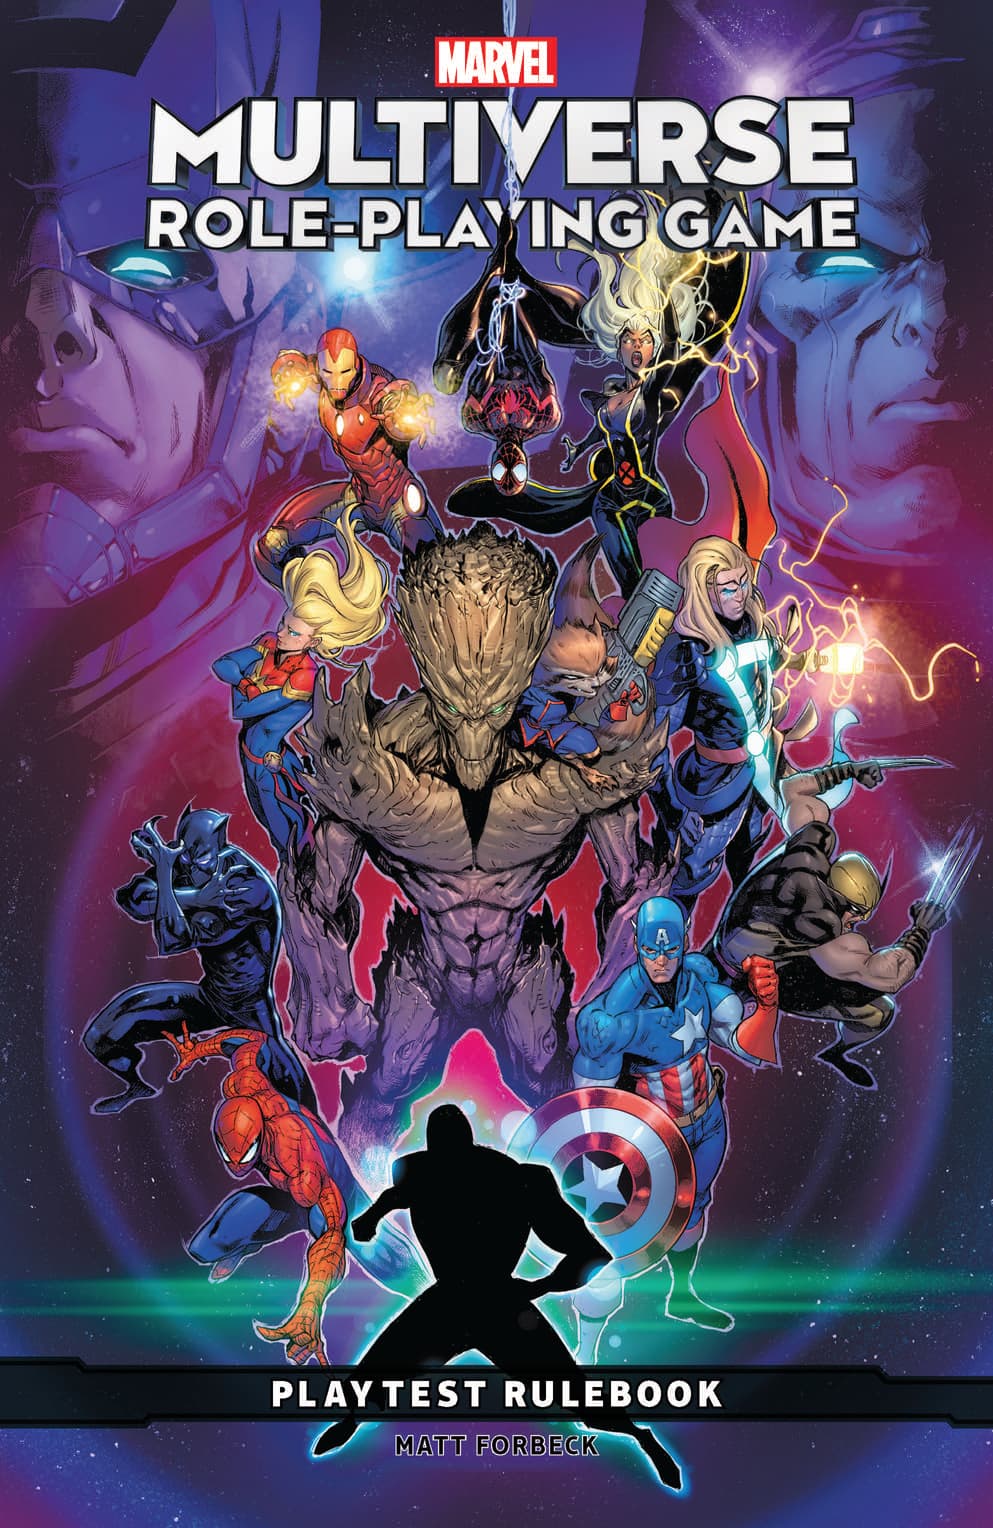 Marvel Multiverse Role-Playing Game Playtest Rulebook Cover by Matt Forbeck